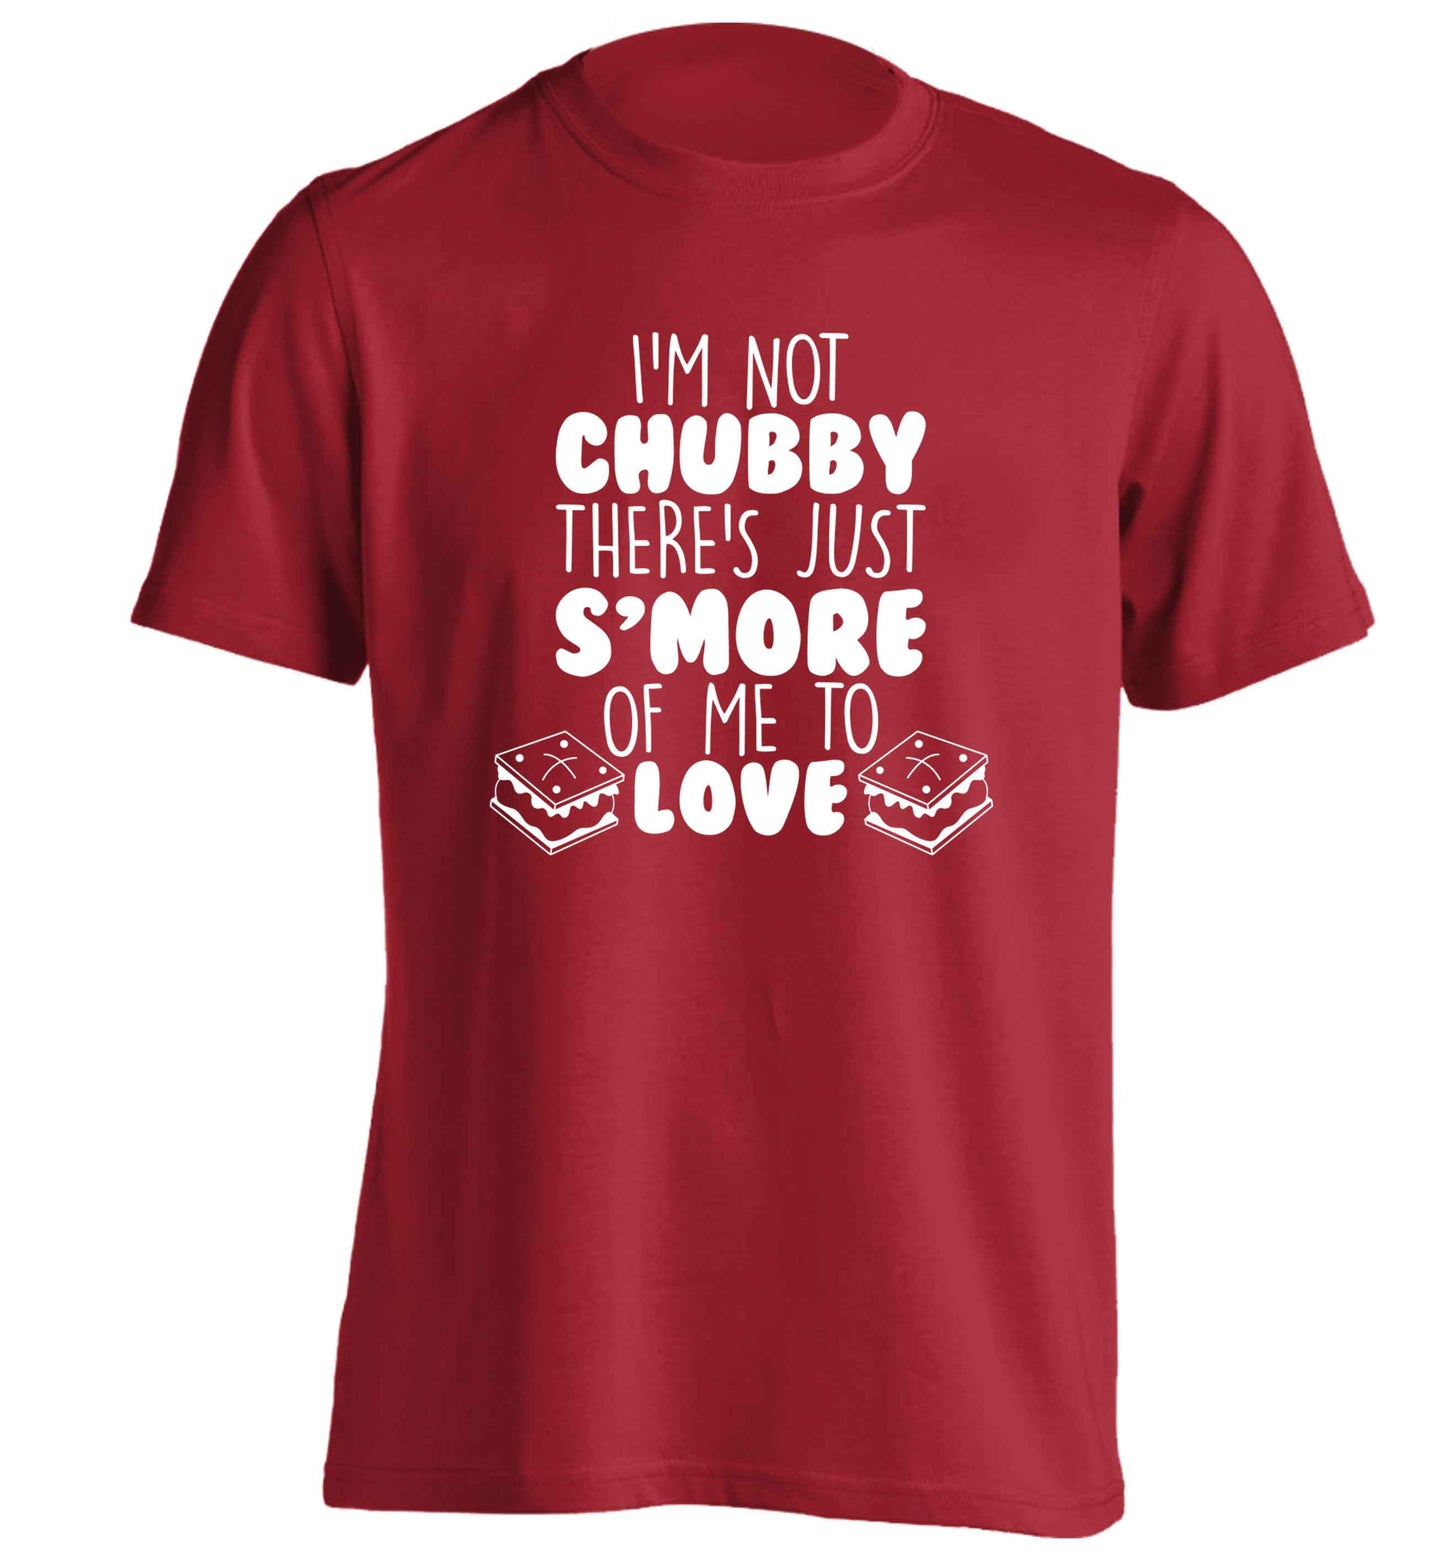 I'm not chubby there's just s'more of me to love adults unisex red Tshirt 2XL